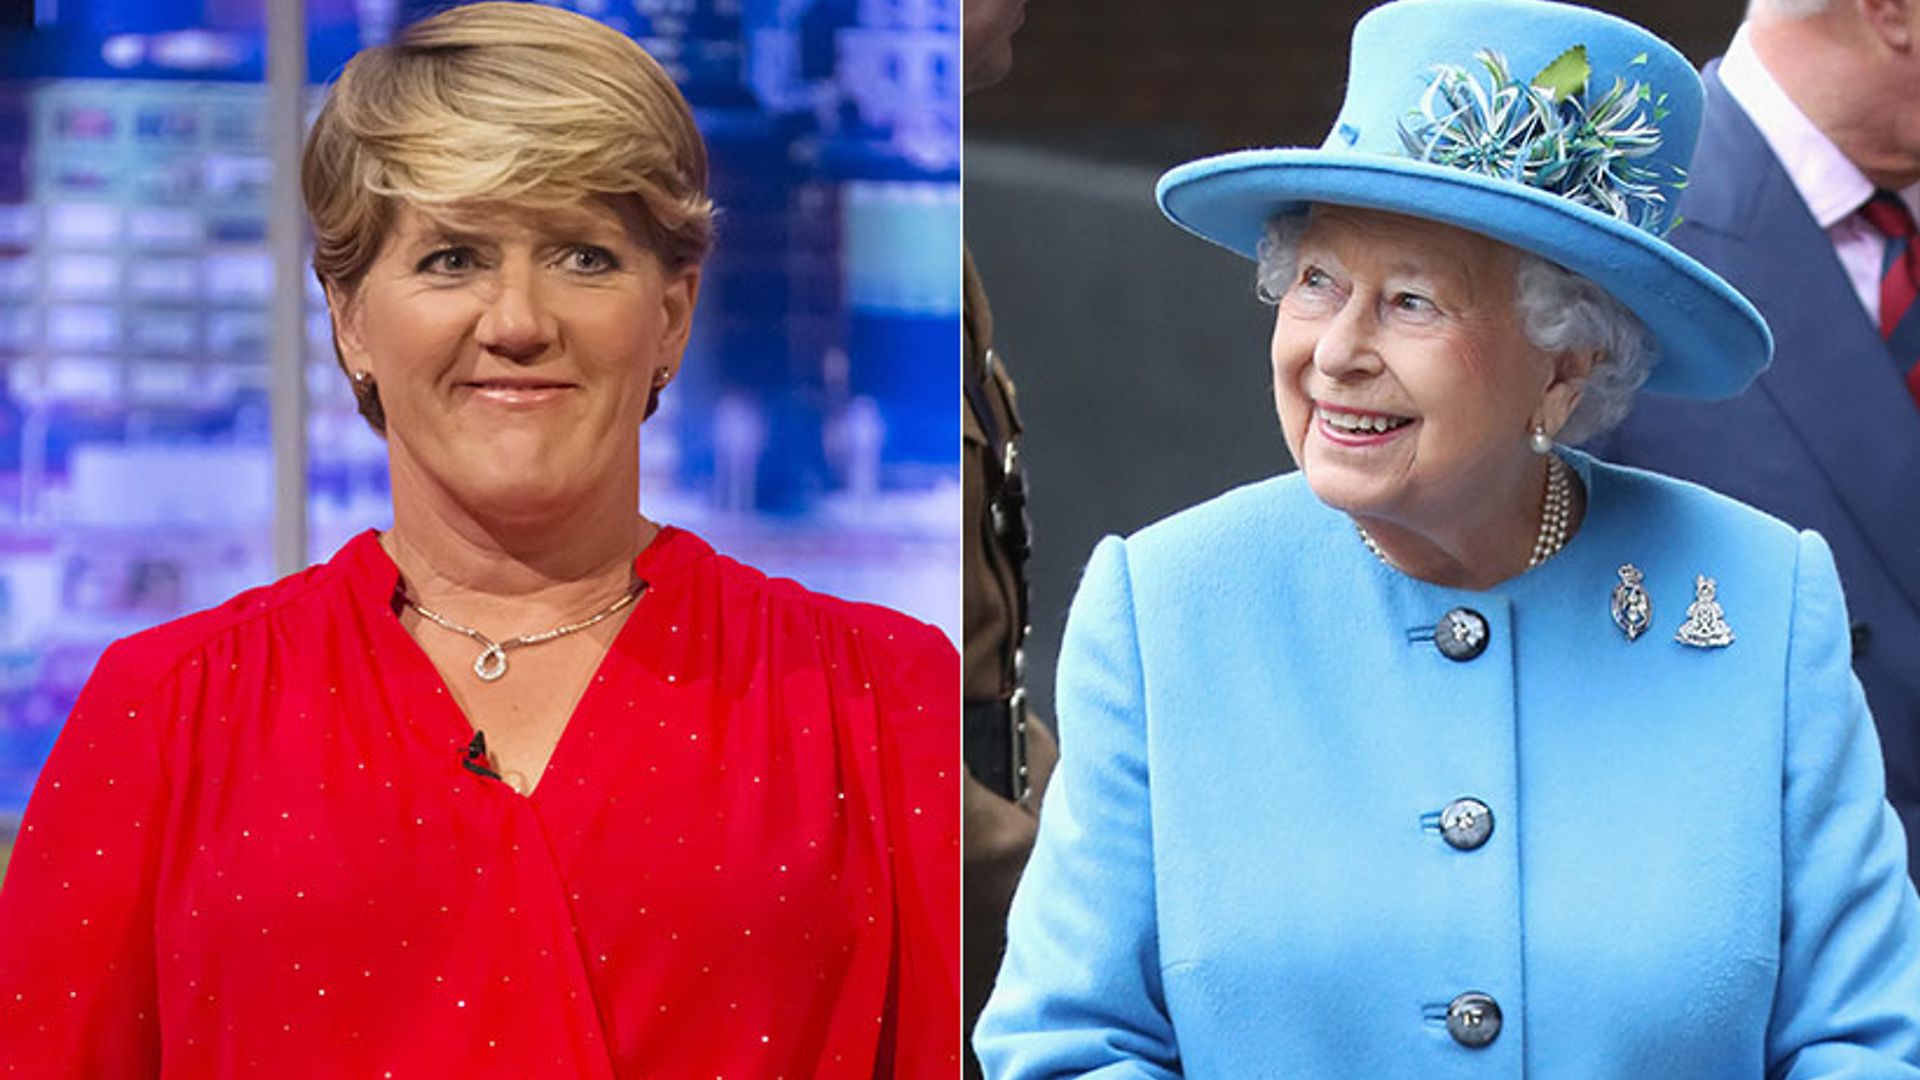 Clare Balding shares sweet memory of having breakfast with the Queen